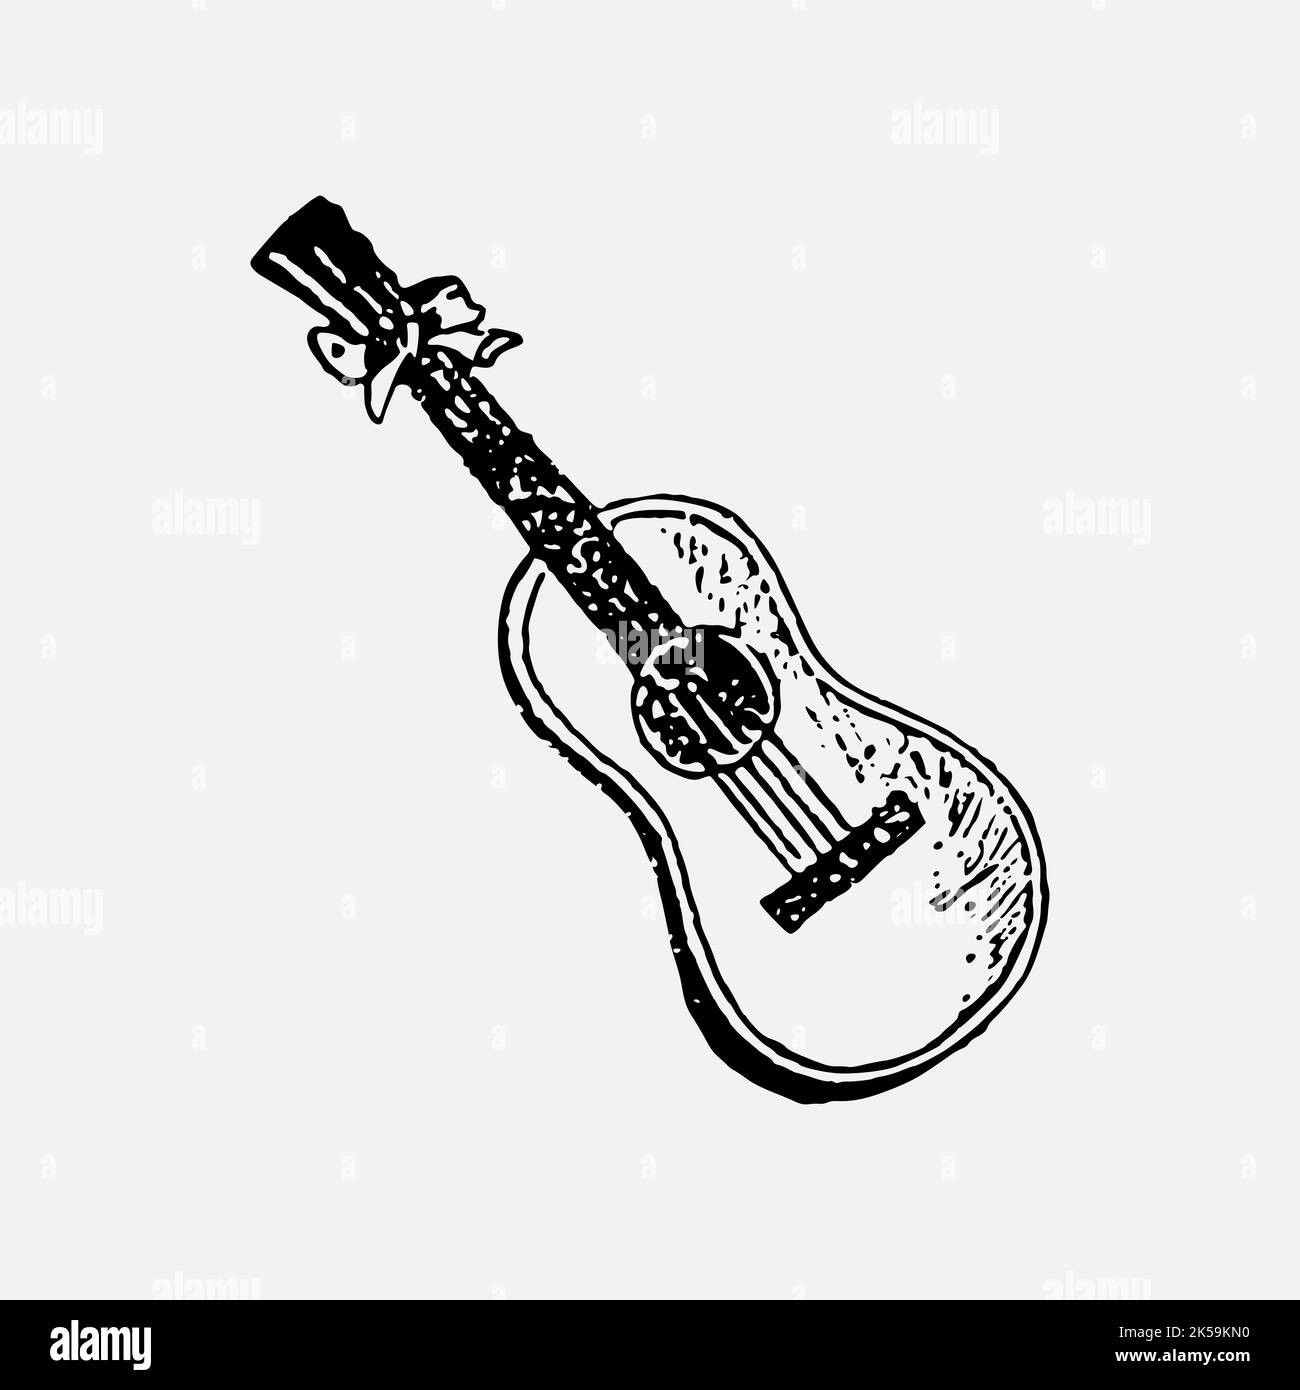 Acoustic guitar drawing, vintage music illustration vector. Stock Vector